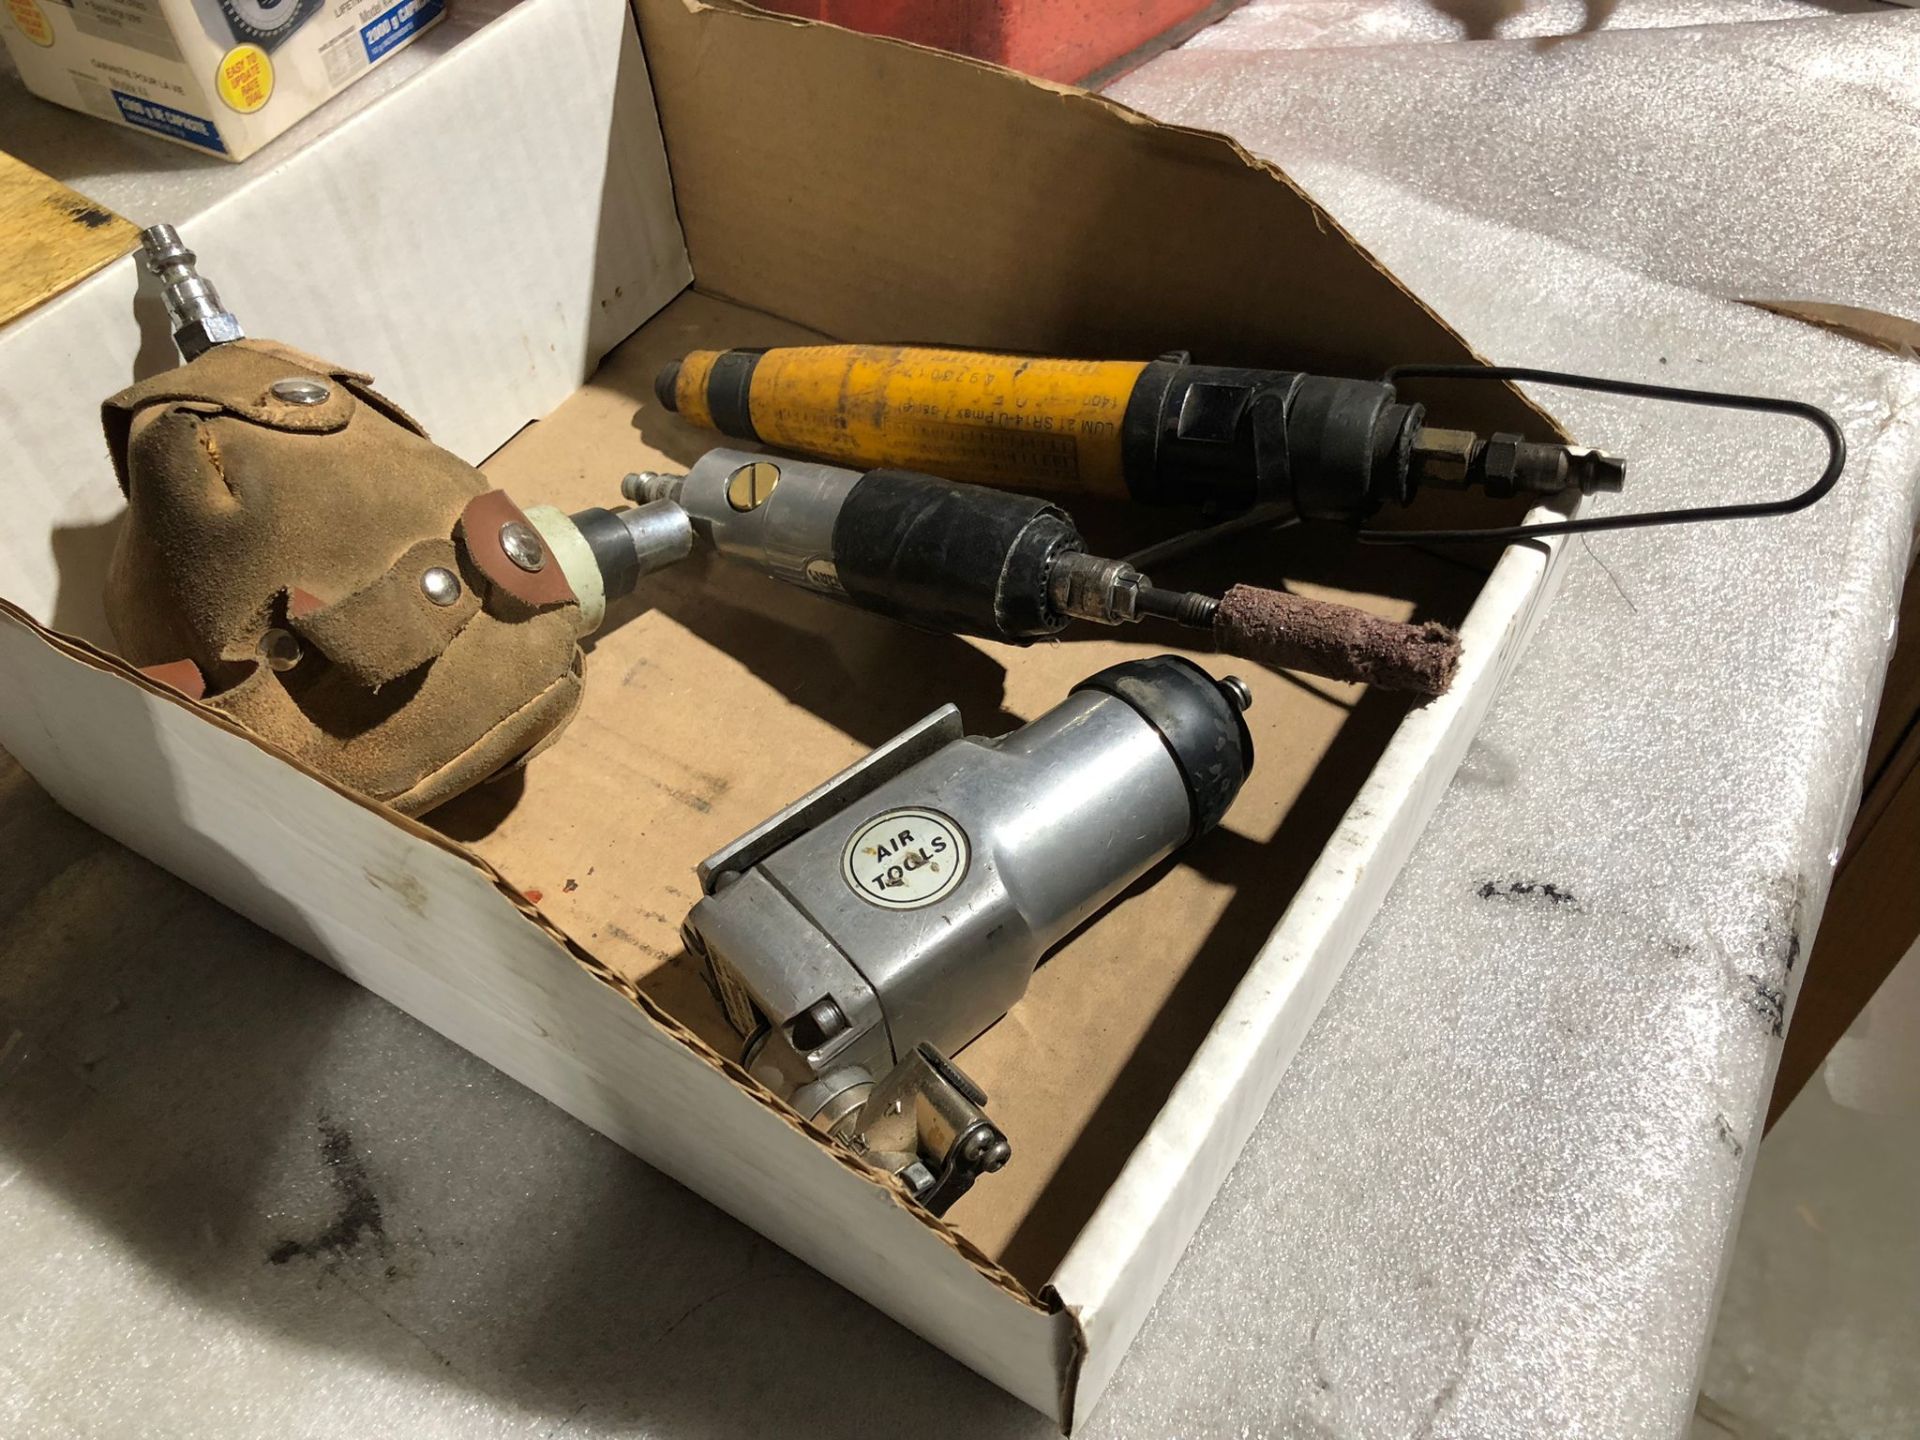 Lot of 5 (5 units) Hand Air Tools - Chipper and rotary tools *** FROM 5-STAR RIGGING - Image 2 of 3